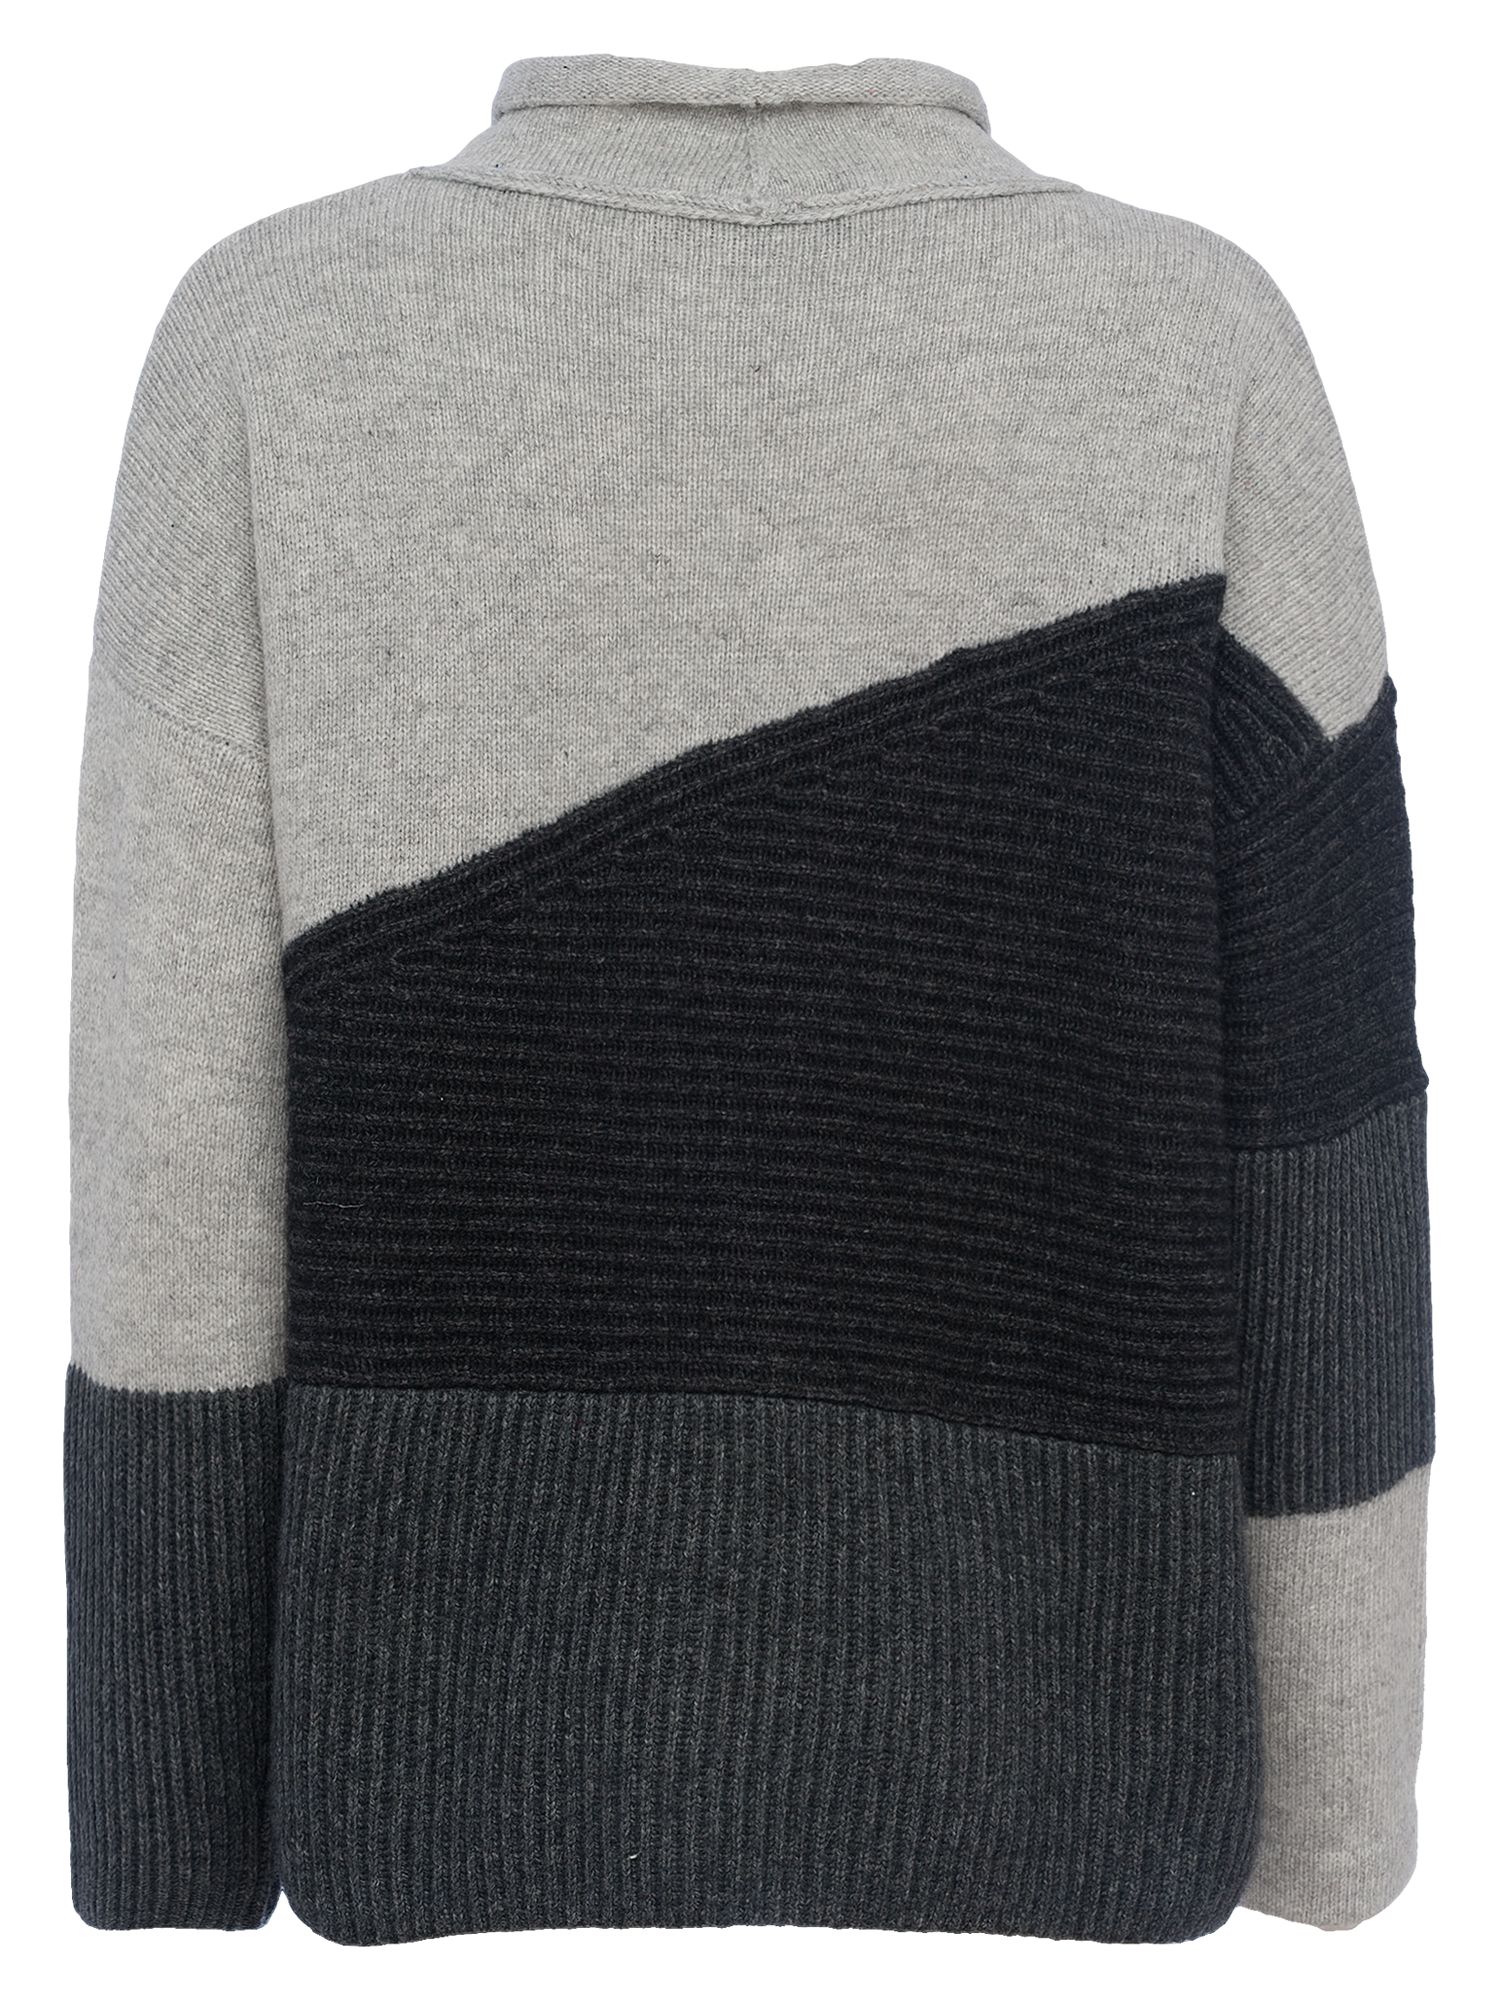 Buy French Connection Patchwork Tonal Jumper | John Lewis